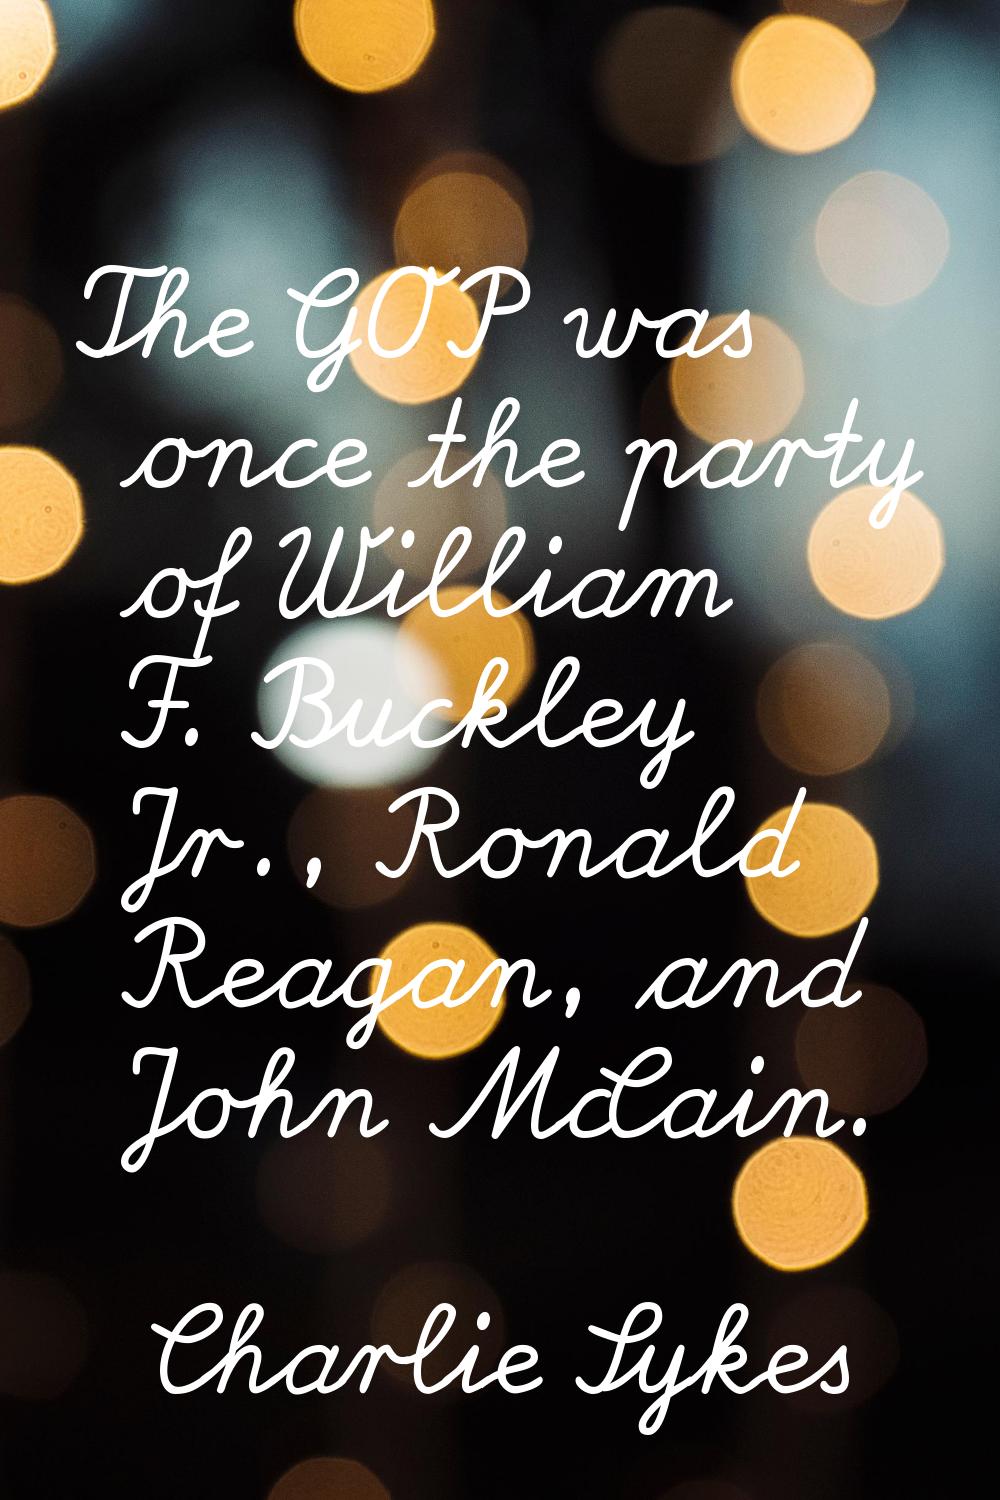 The GOP was once the party of William F. Buckley Jr., Ronald Reagan, and John McCain.